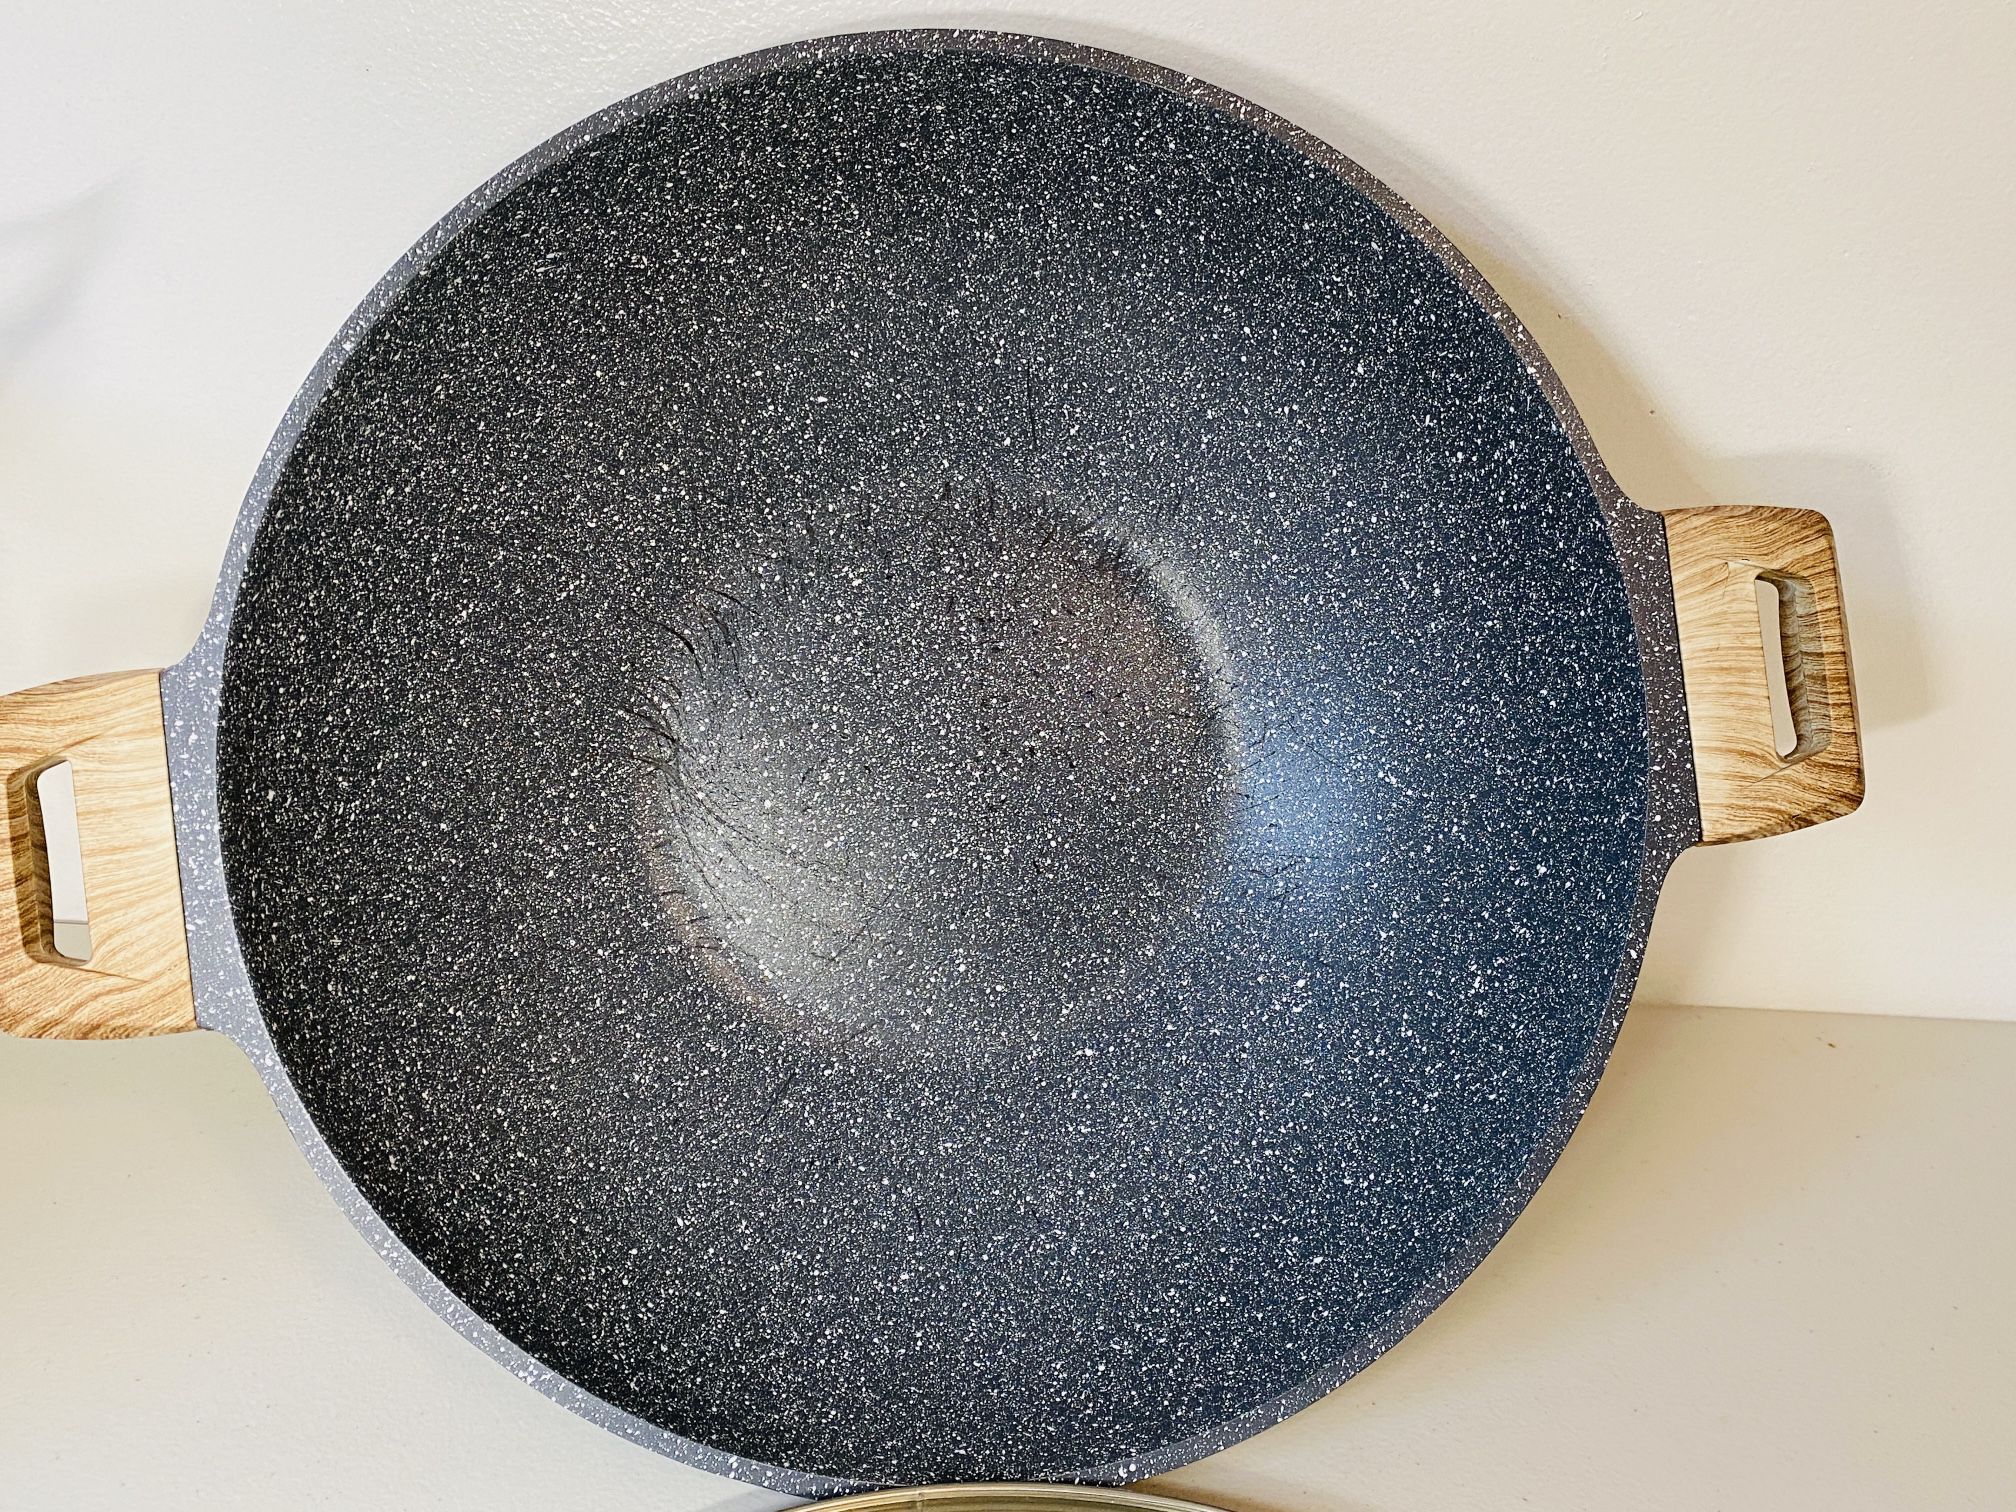 Natural Elements Woodstone Non-stick 12 Wok 4.75-Qt Pan With Lid Black New